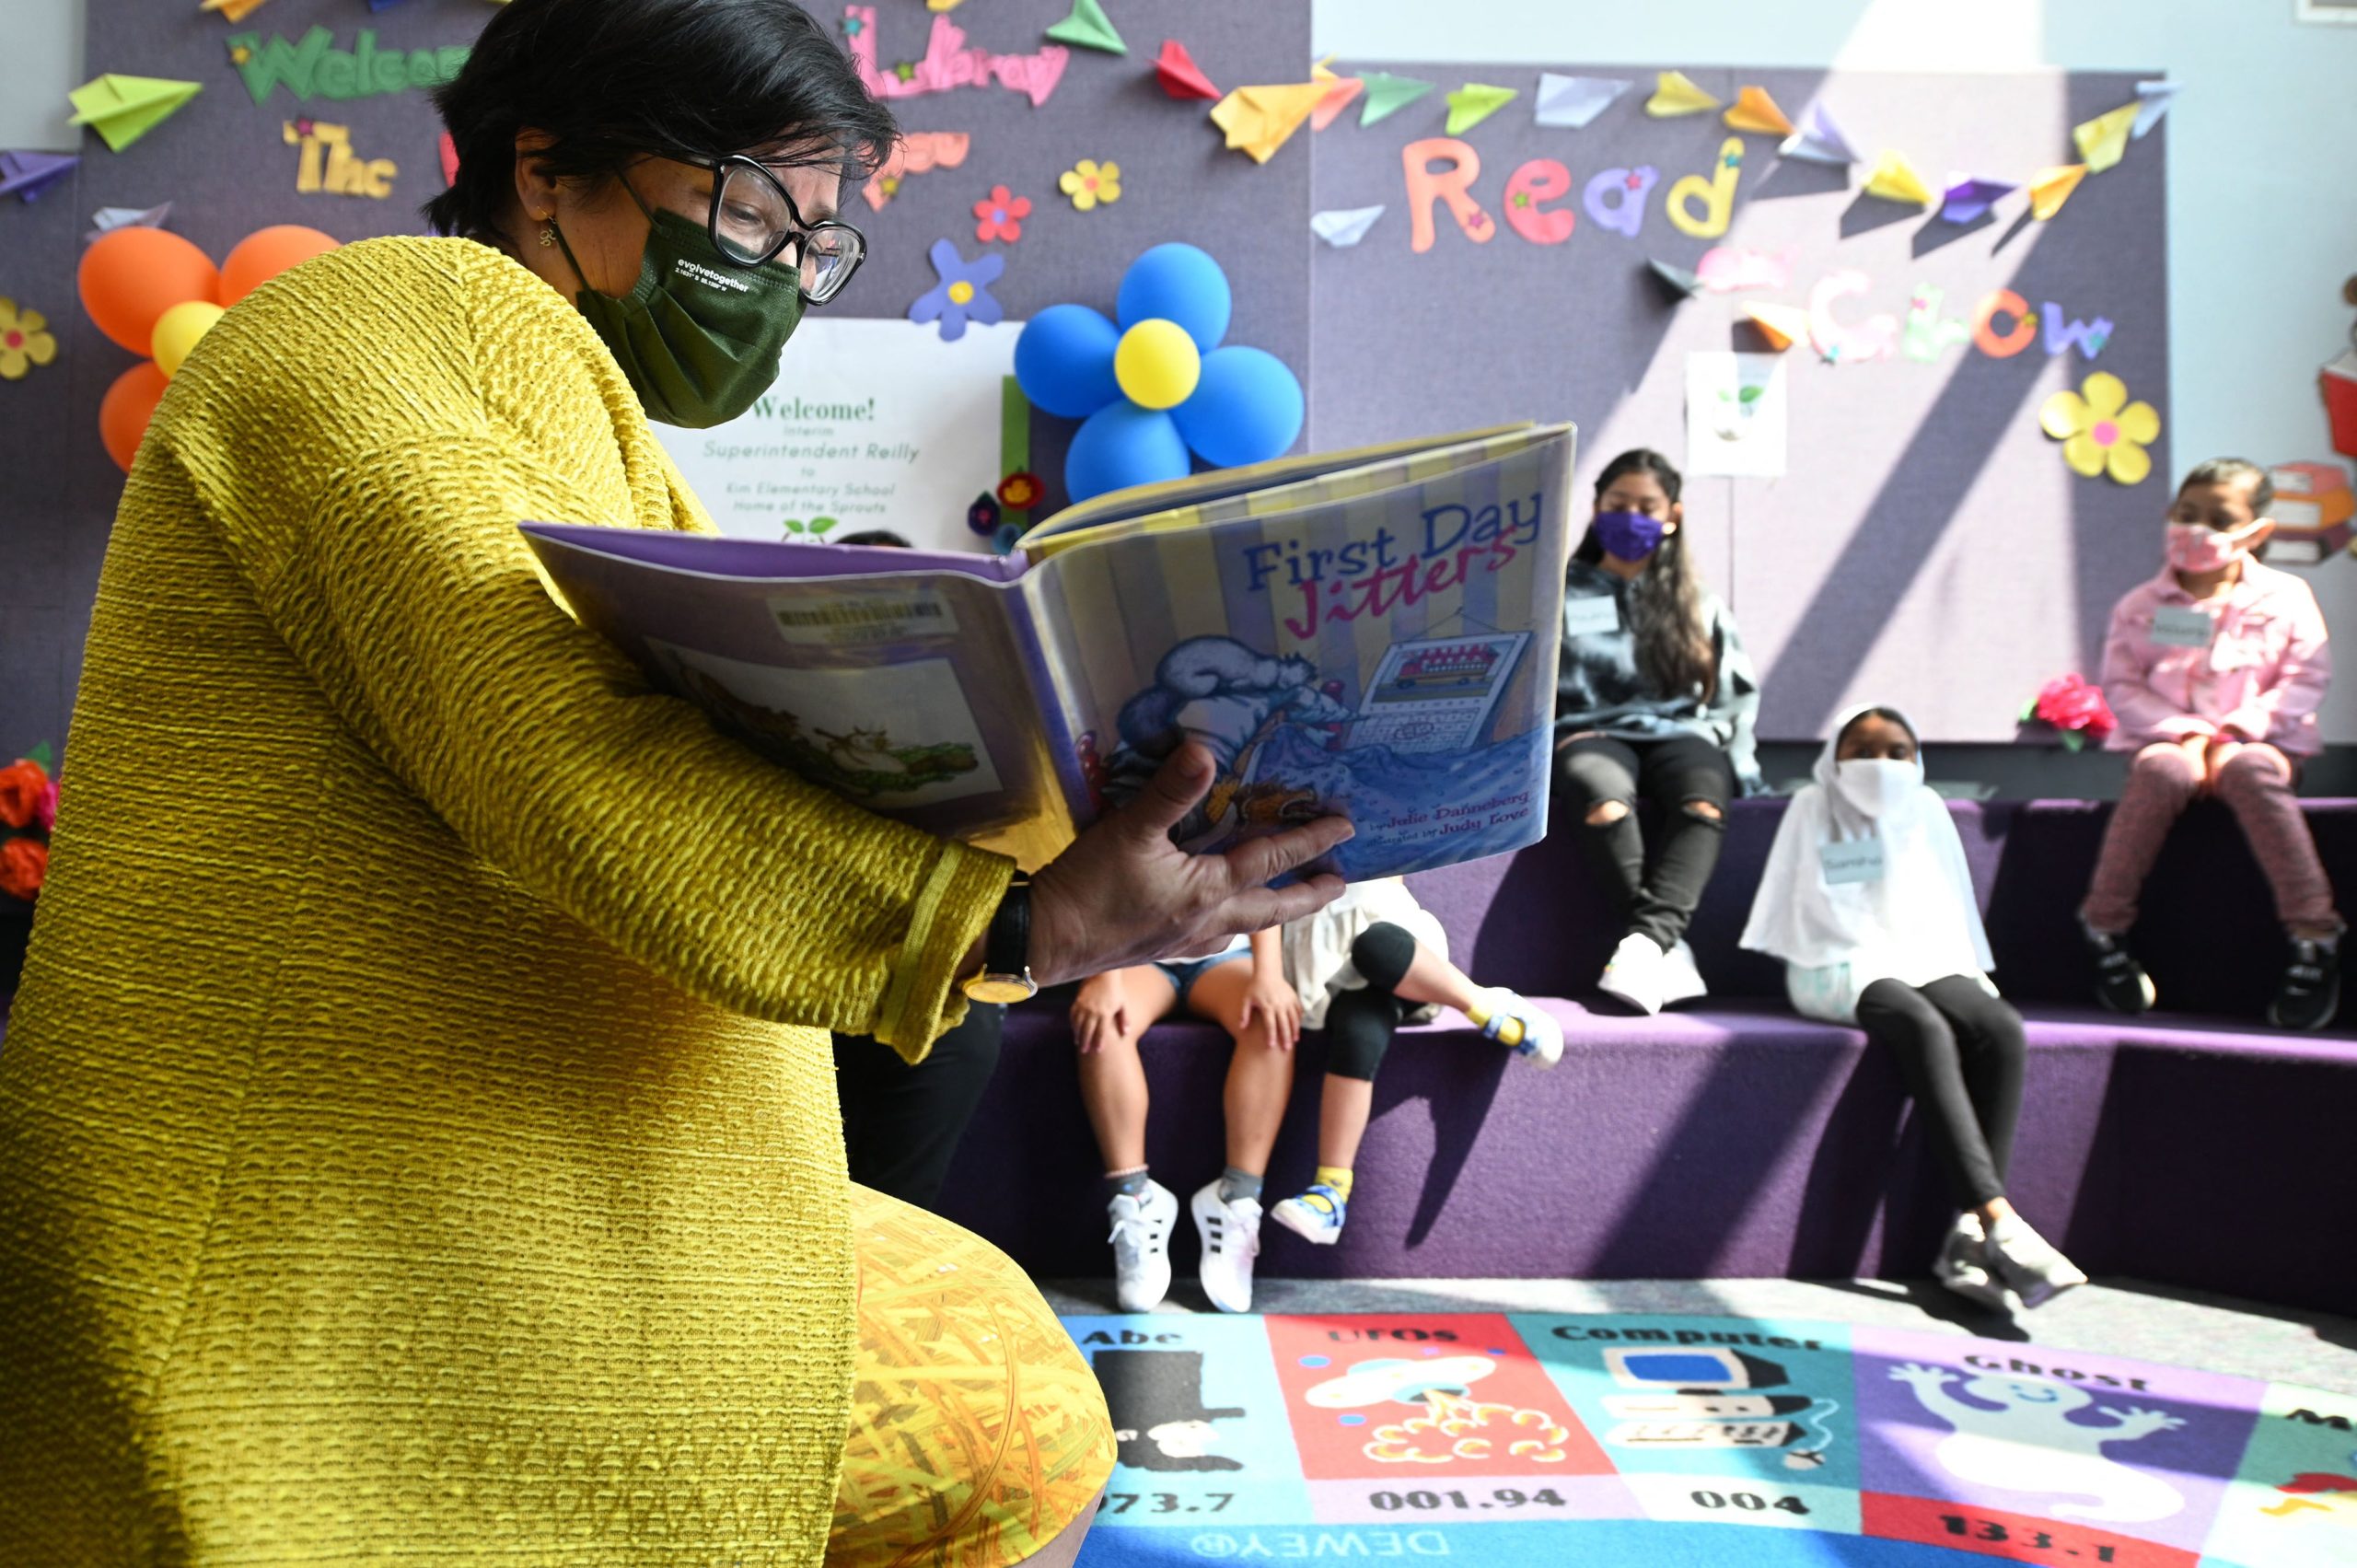 Los Angeles Unified School District (LAUSD) interim Superintendent Megan Reilly reads a book called "First Day Jitters" to students in the library at Kim Elementary School on the first day of the school year, in Los Angeles, California, August 16, 2021. - To stem the spread of Covid-19 coronavirus teachers in Los Angeles are required to be fully vaccinated against Covid-19 by October 15 and both teachers and students are required to wear masks inside school buildings. Issues wih the new "Daily Pass" health check app caused confusion and long lines on the first day back to school. (Photo by Robyn Beck / AFP) (Photo by ROBYN BECK/AFP via Getty Images)